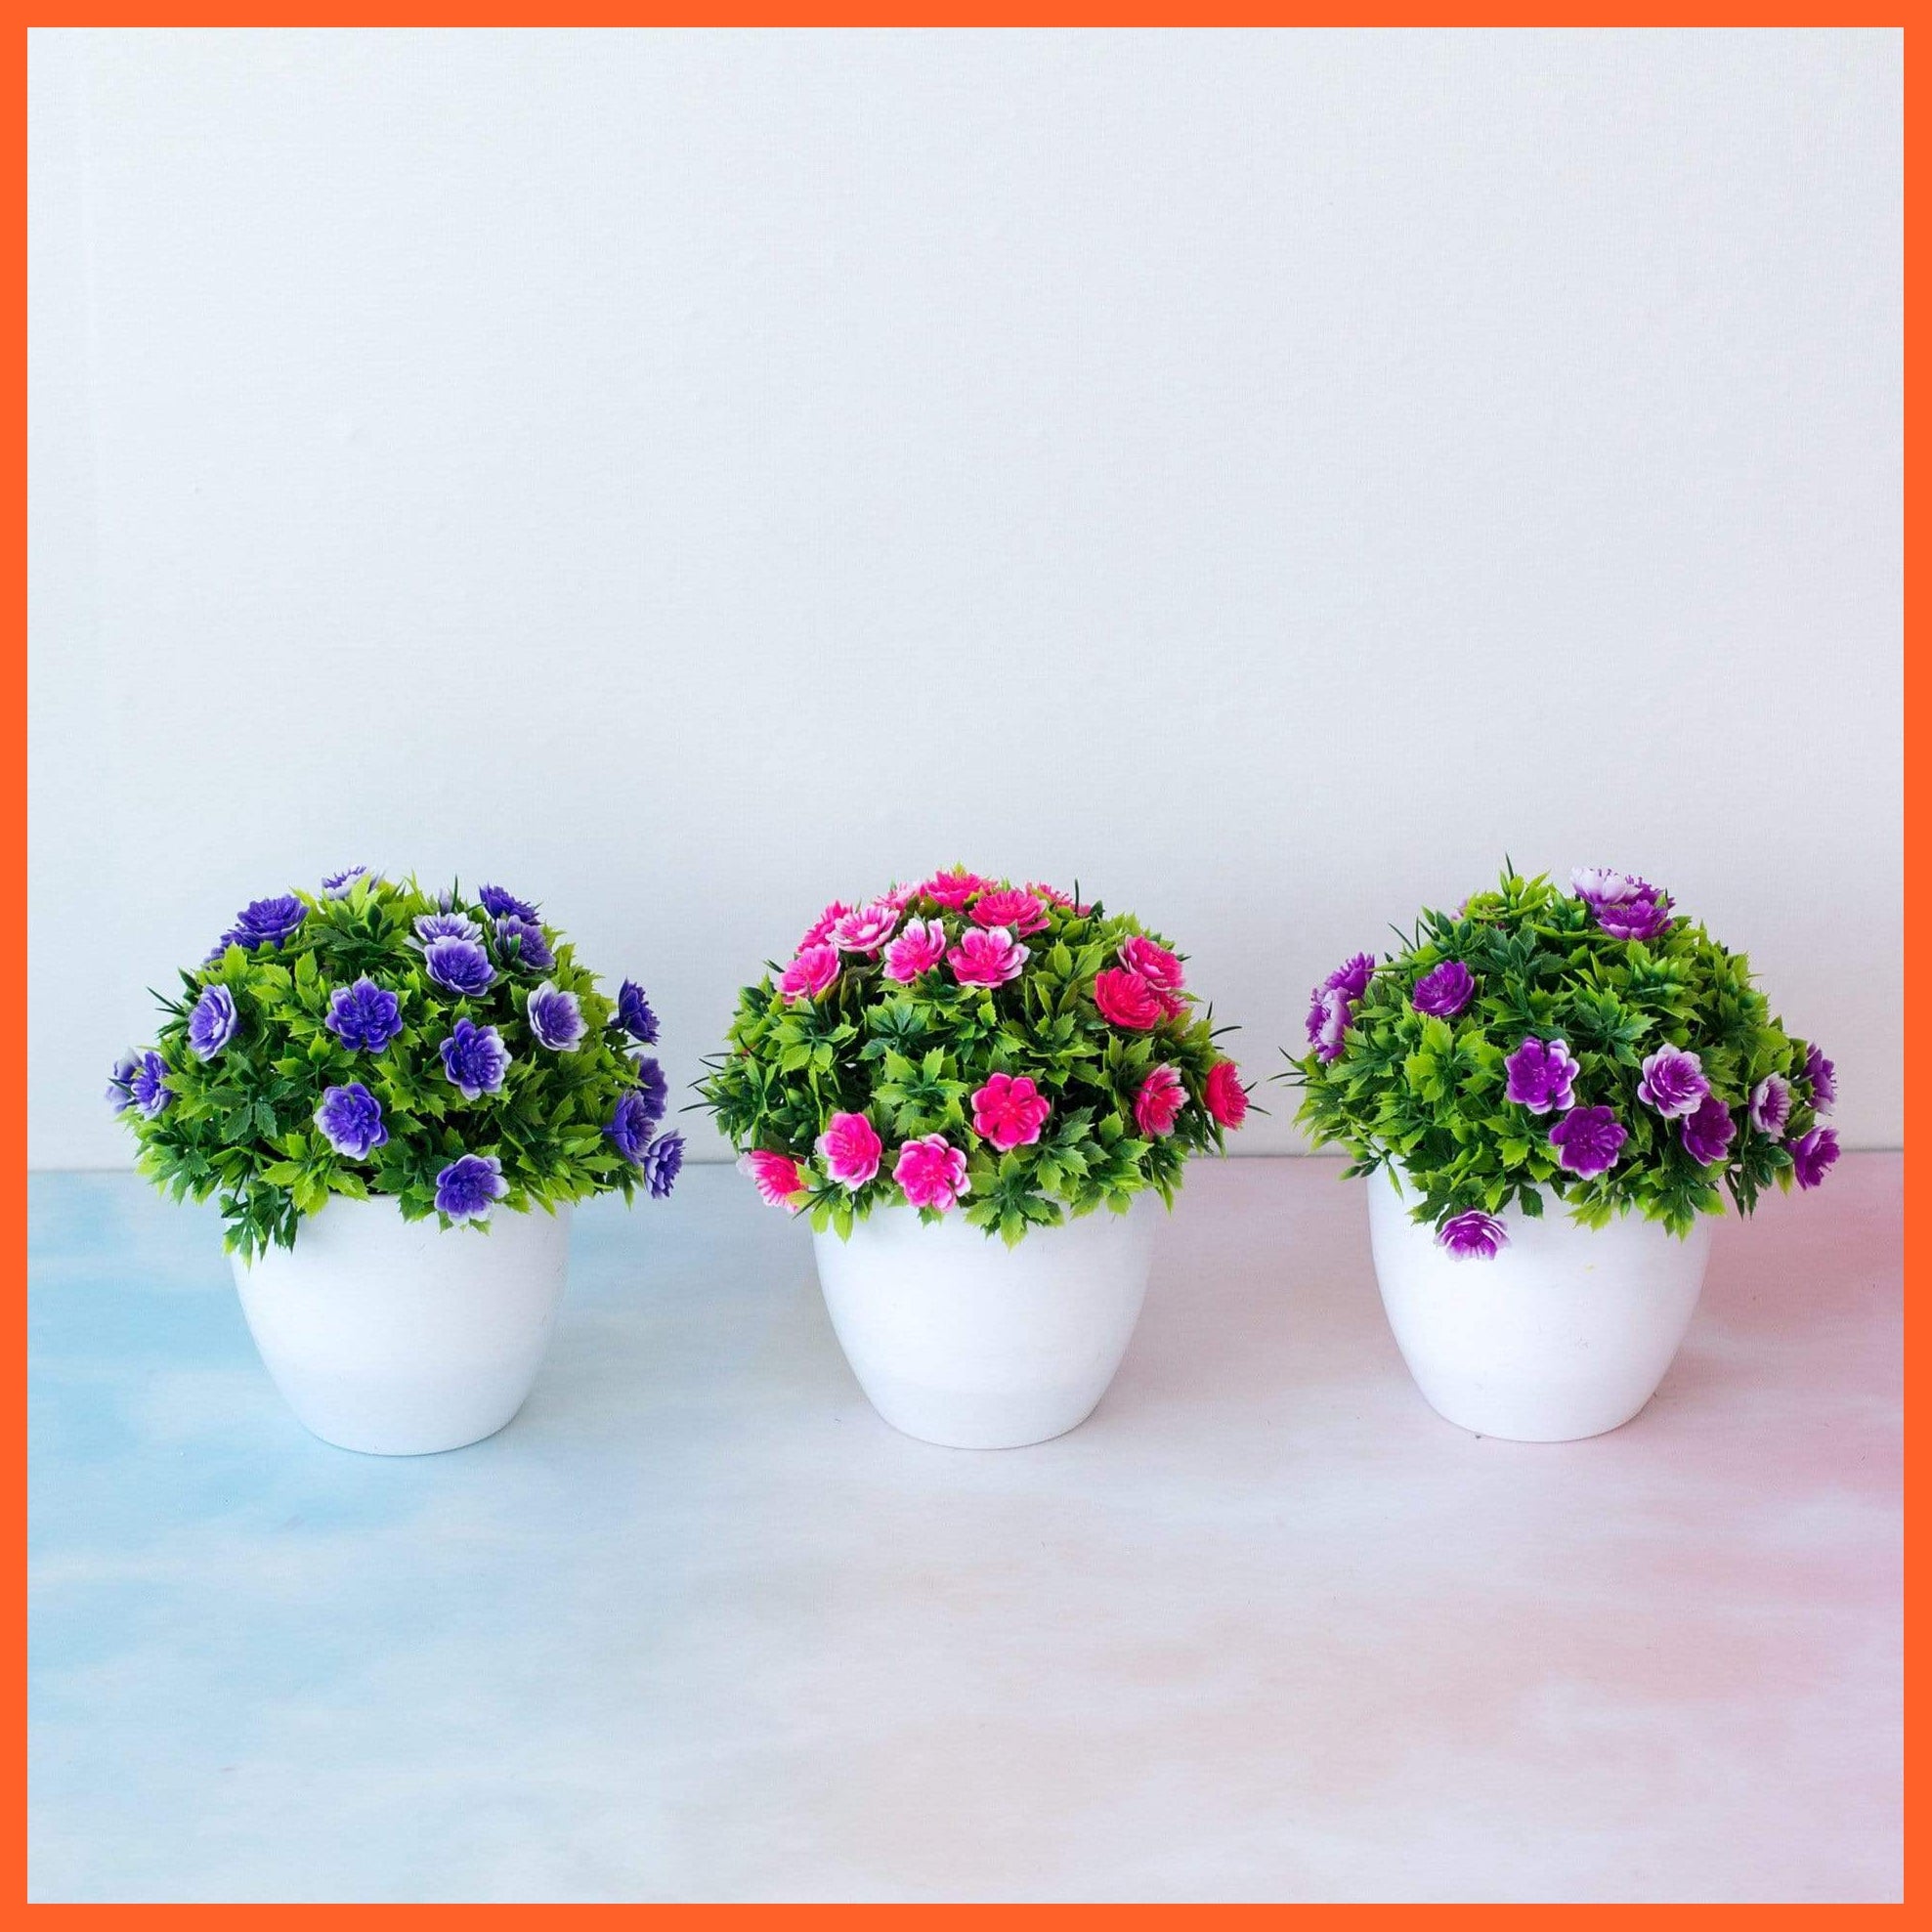 Flower Potted Plant For Home Decor Of Office Artificial | whatagift.com.au.